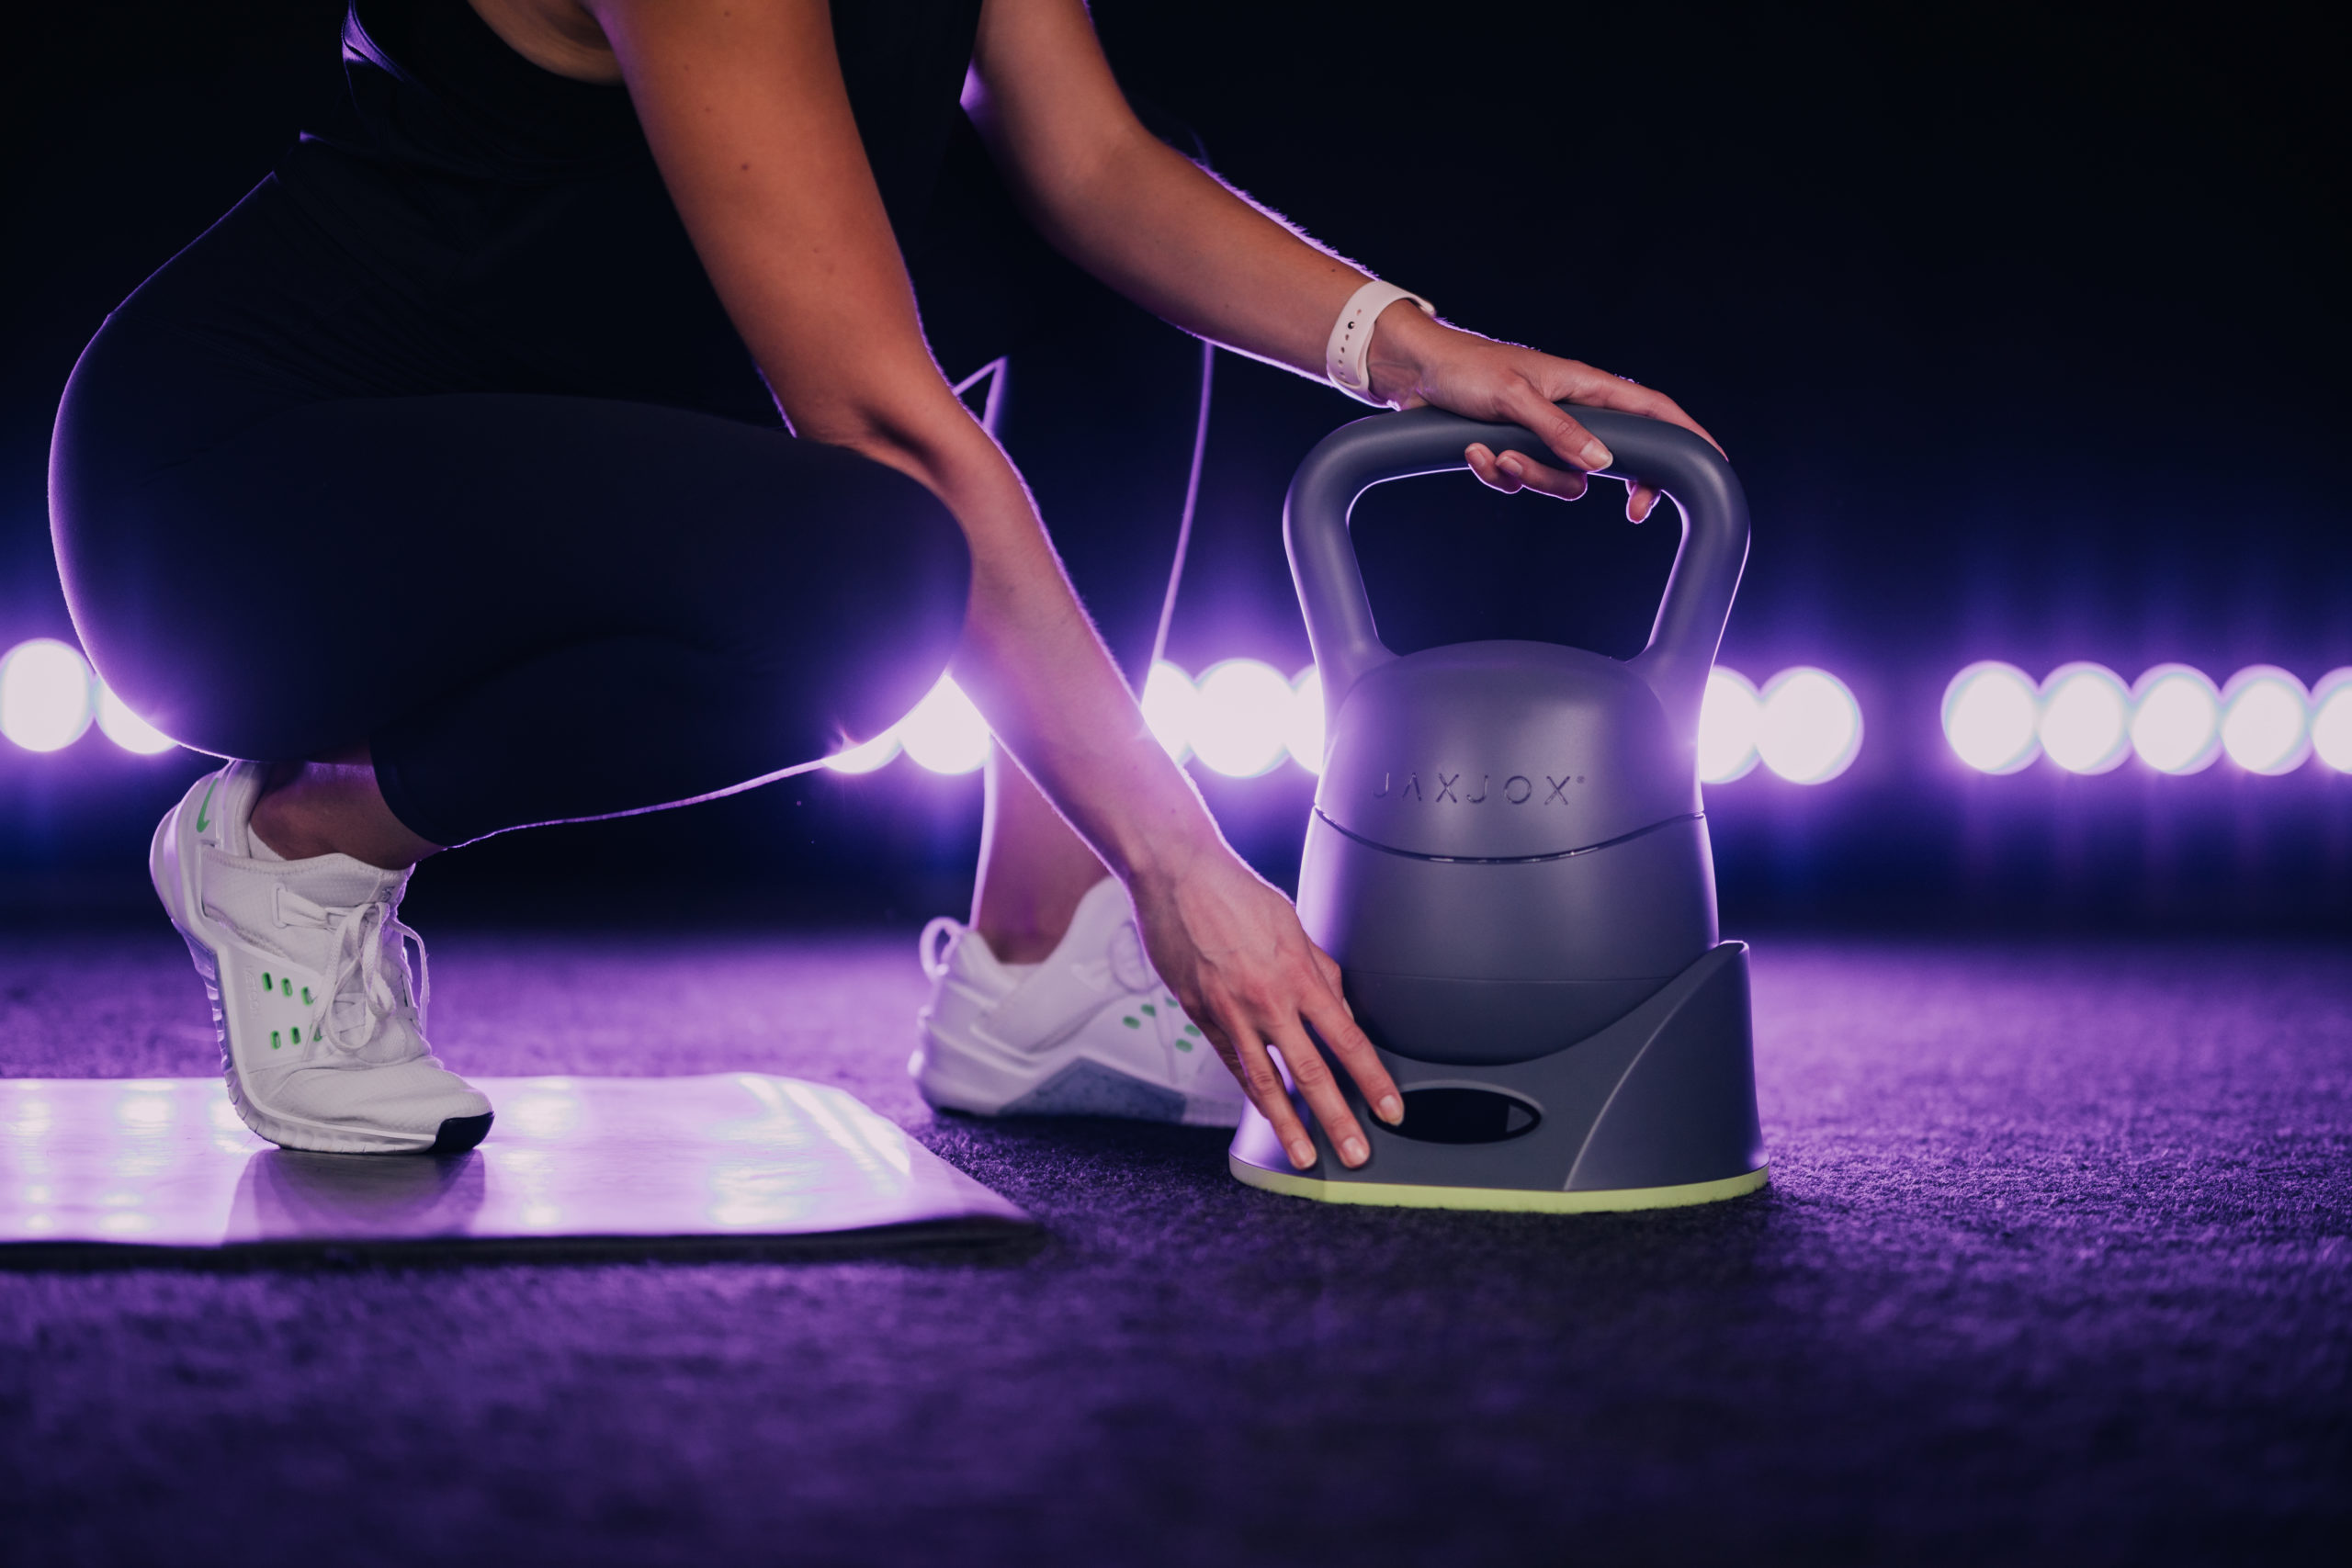 Gift Guide: Smart exercise gear to hunker down and get fit with